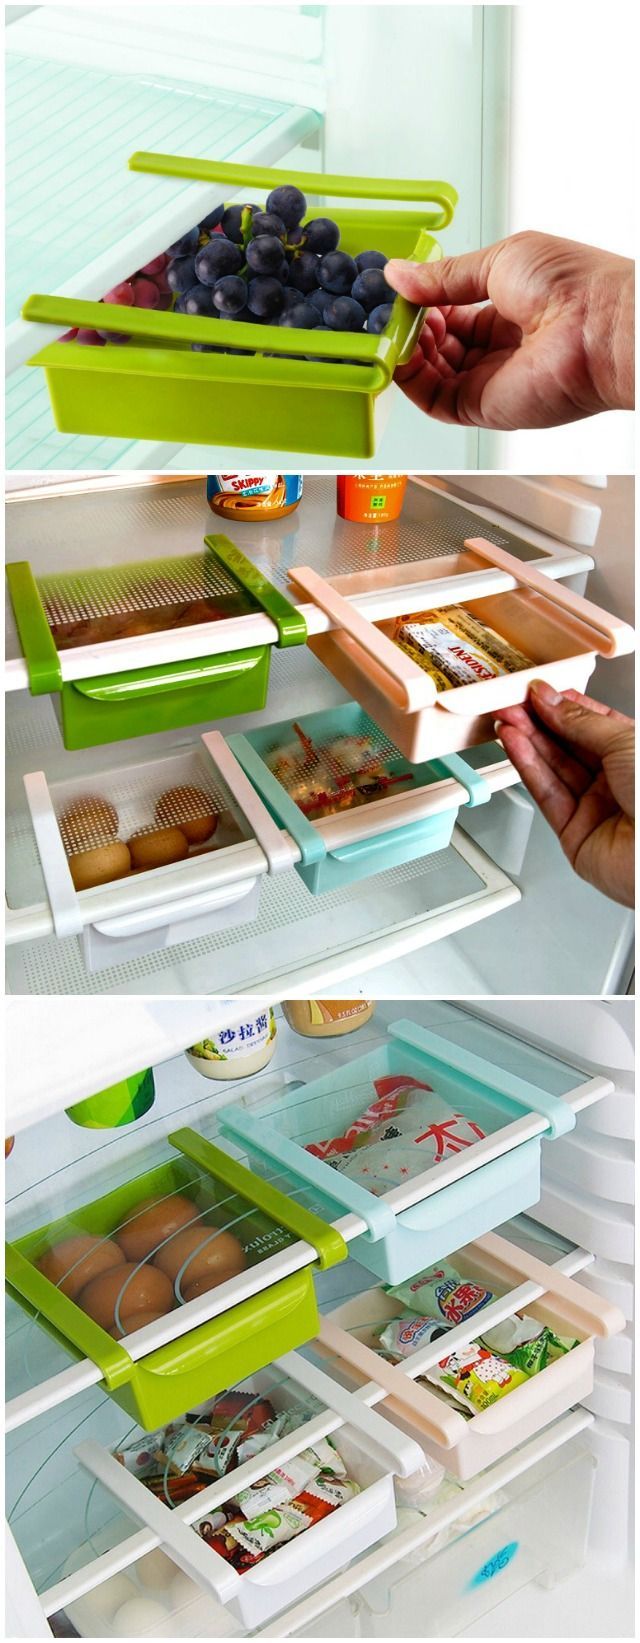 Maximize your storage space with the Refrigerator Sliding Drawer. Large enough to